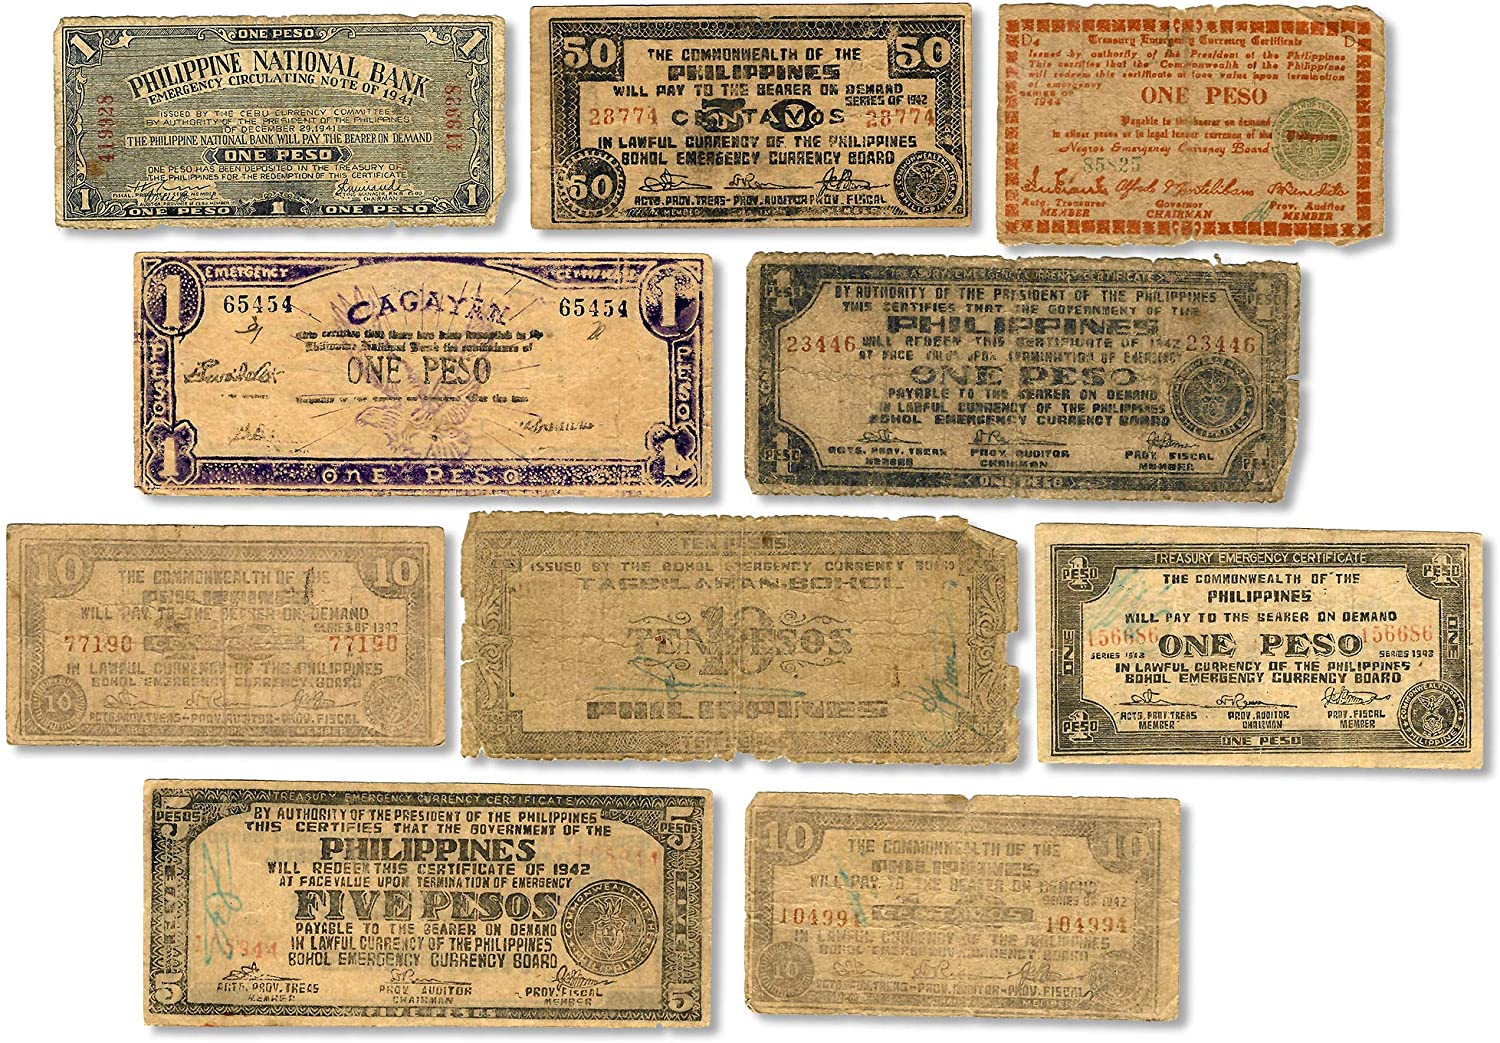 WW2 World Currency - 10 Banknotes Used During The World War 2 by The Guerrilla (Philippines 1941-1945) - The Death Sentence Money, Certificate of Authenticity